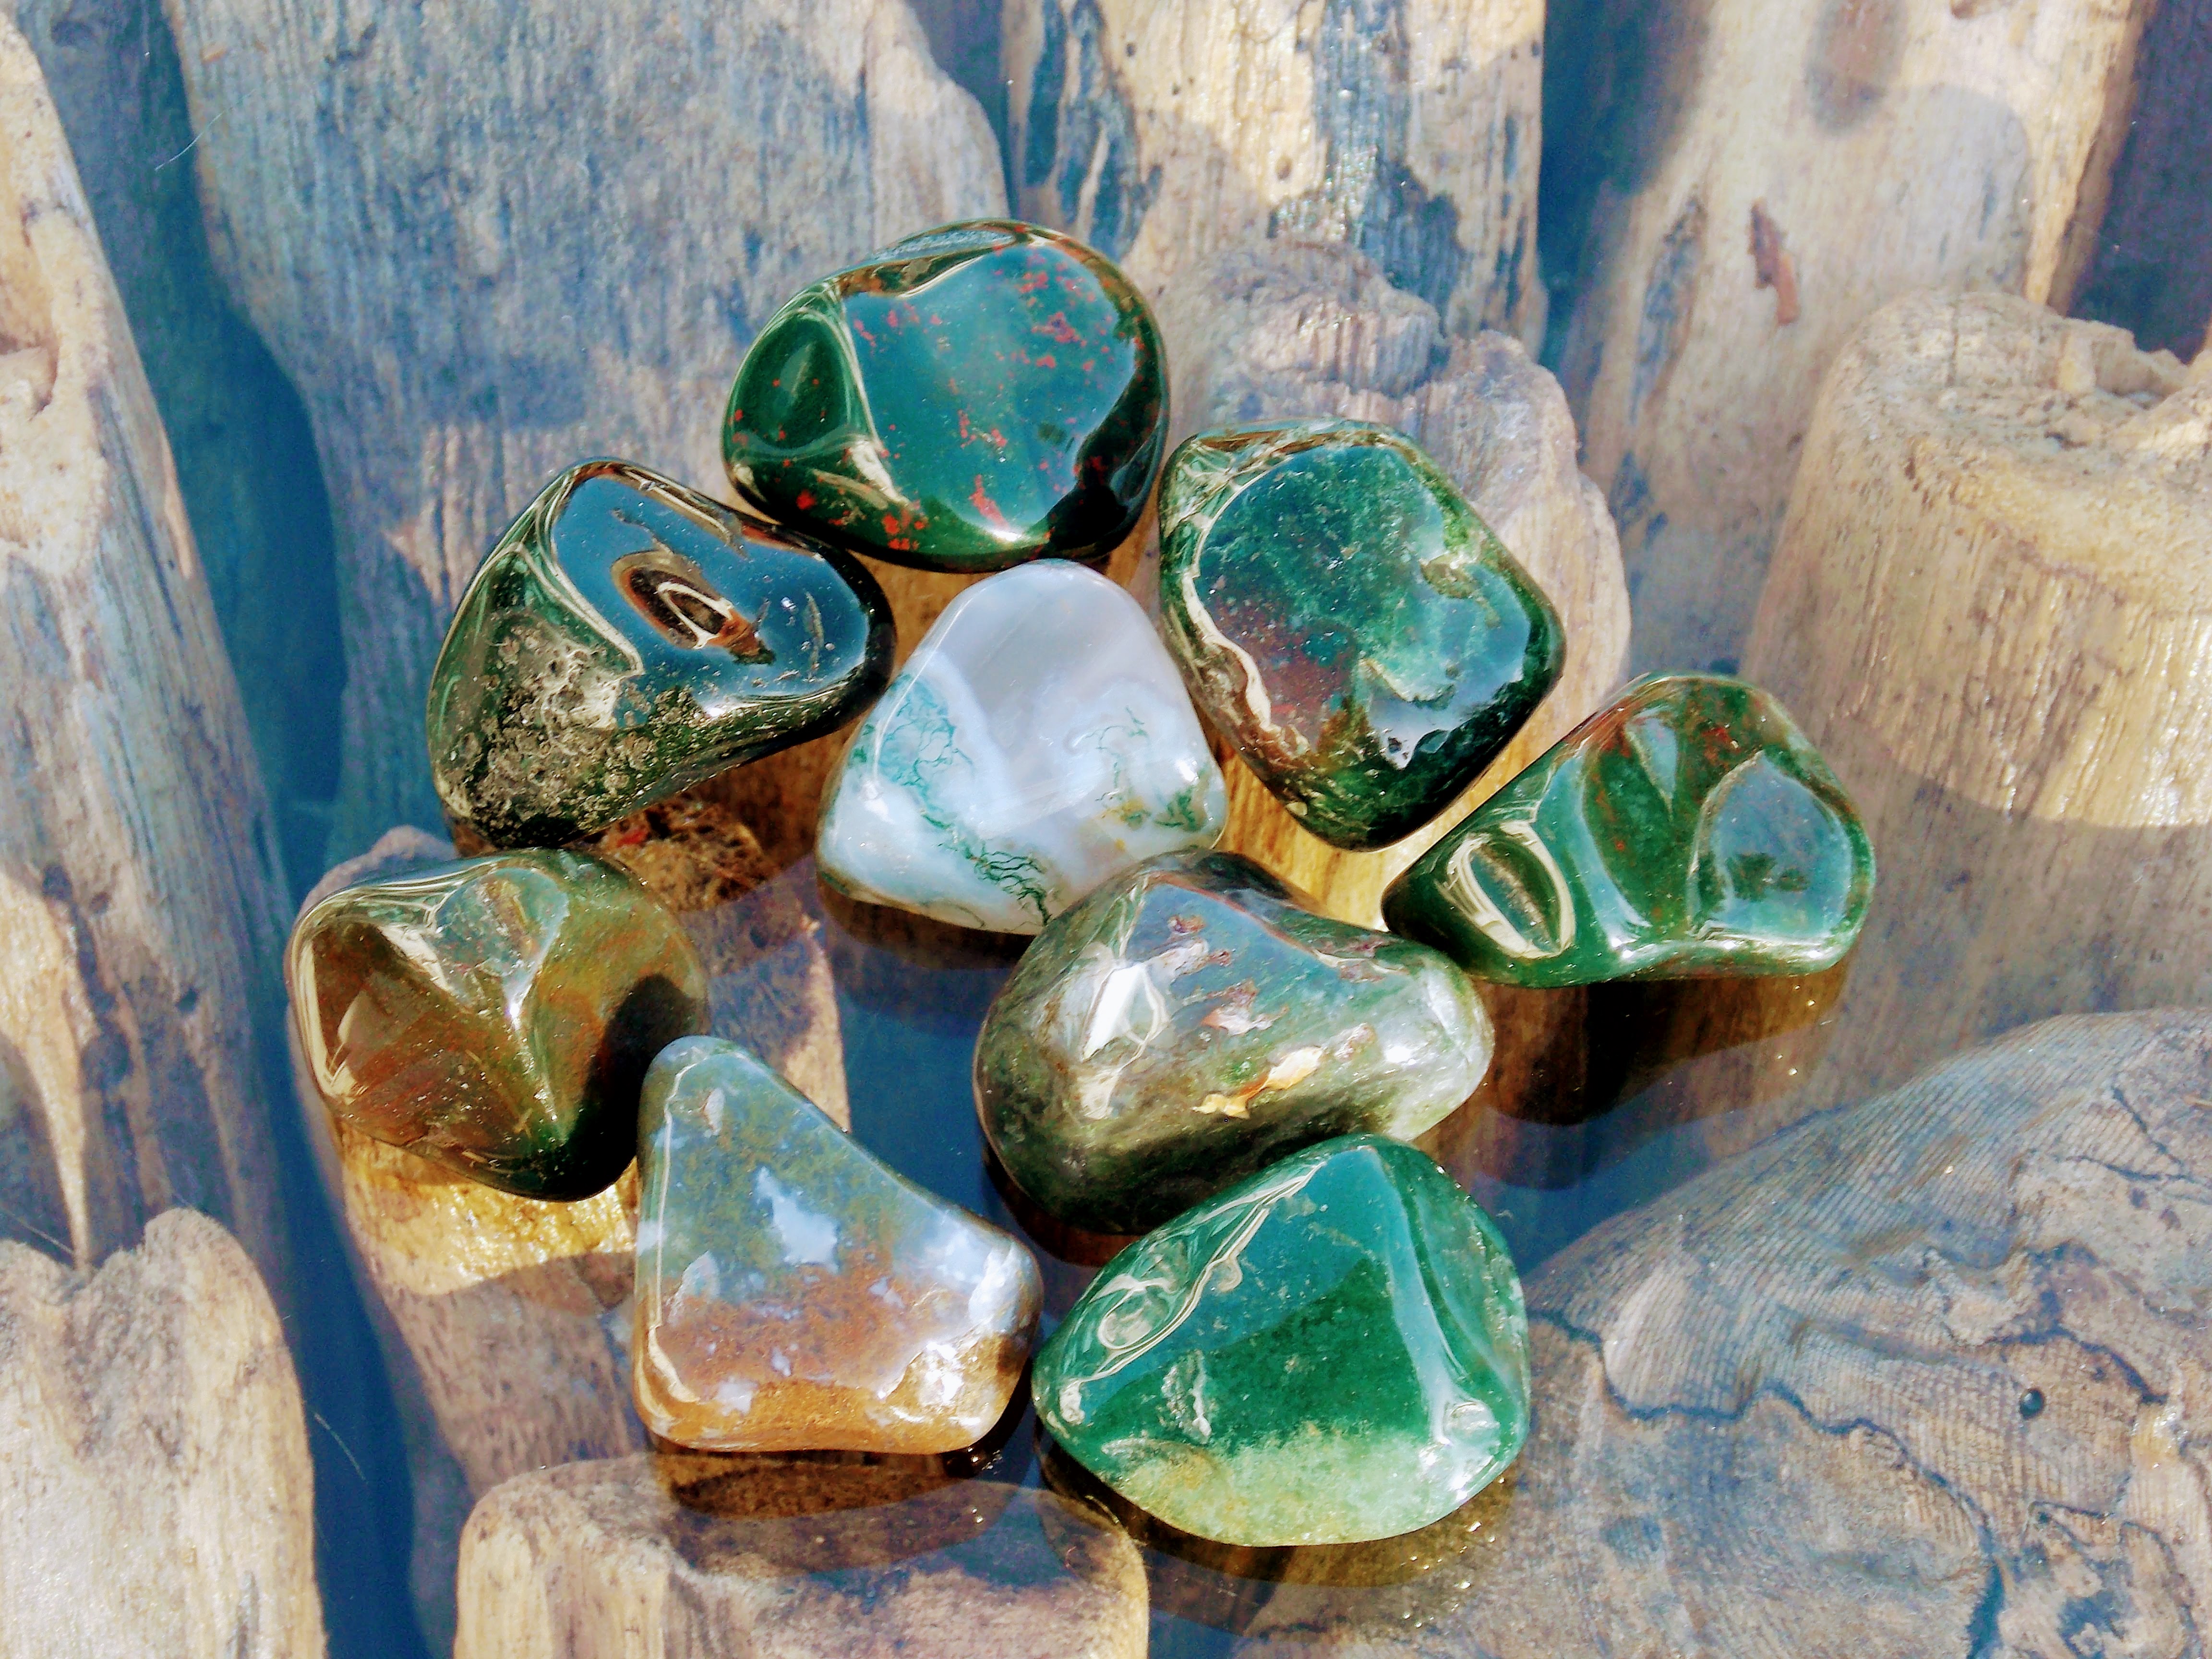 Moss Agate Polished Stones